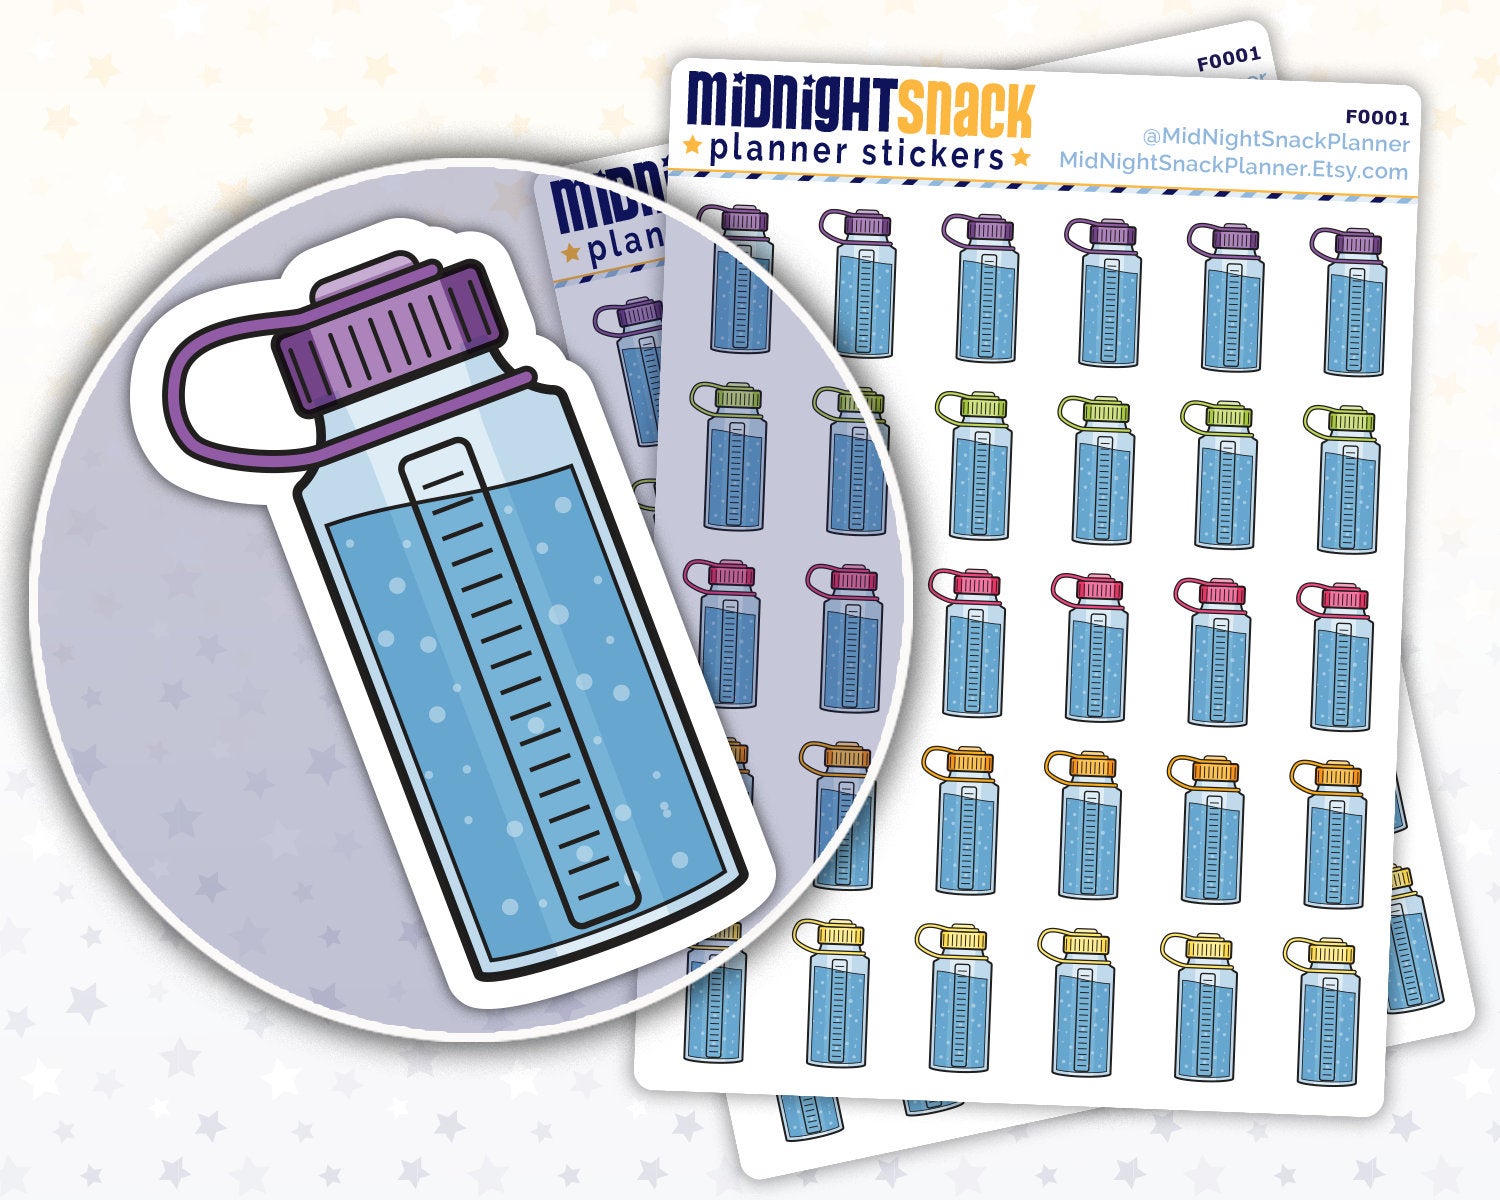 Water Bottle Icon: Health and Fitness Planner Stickers Midnight Snack Planner